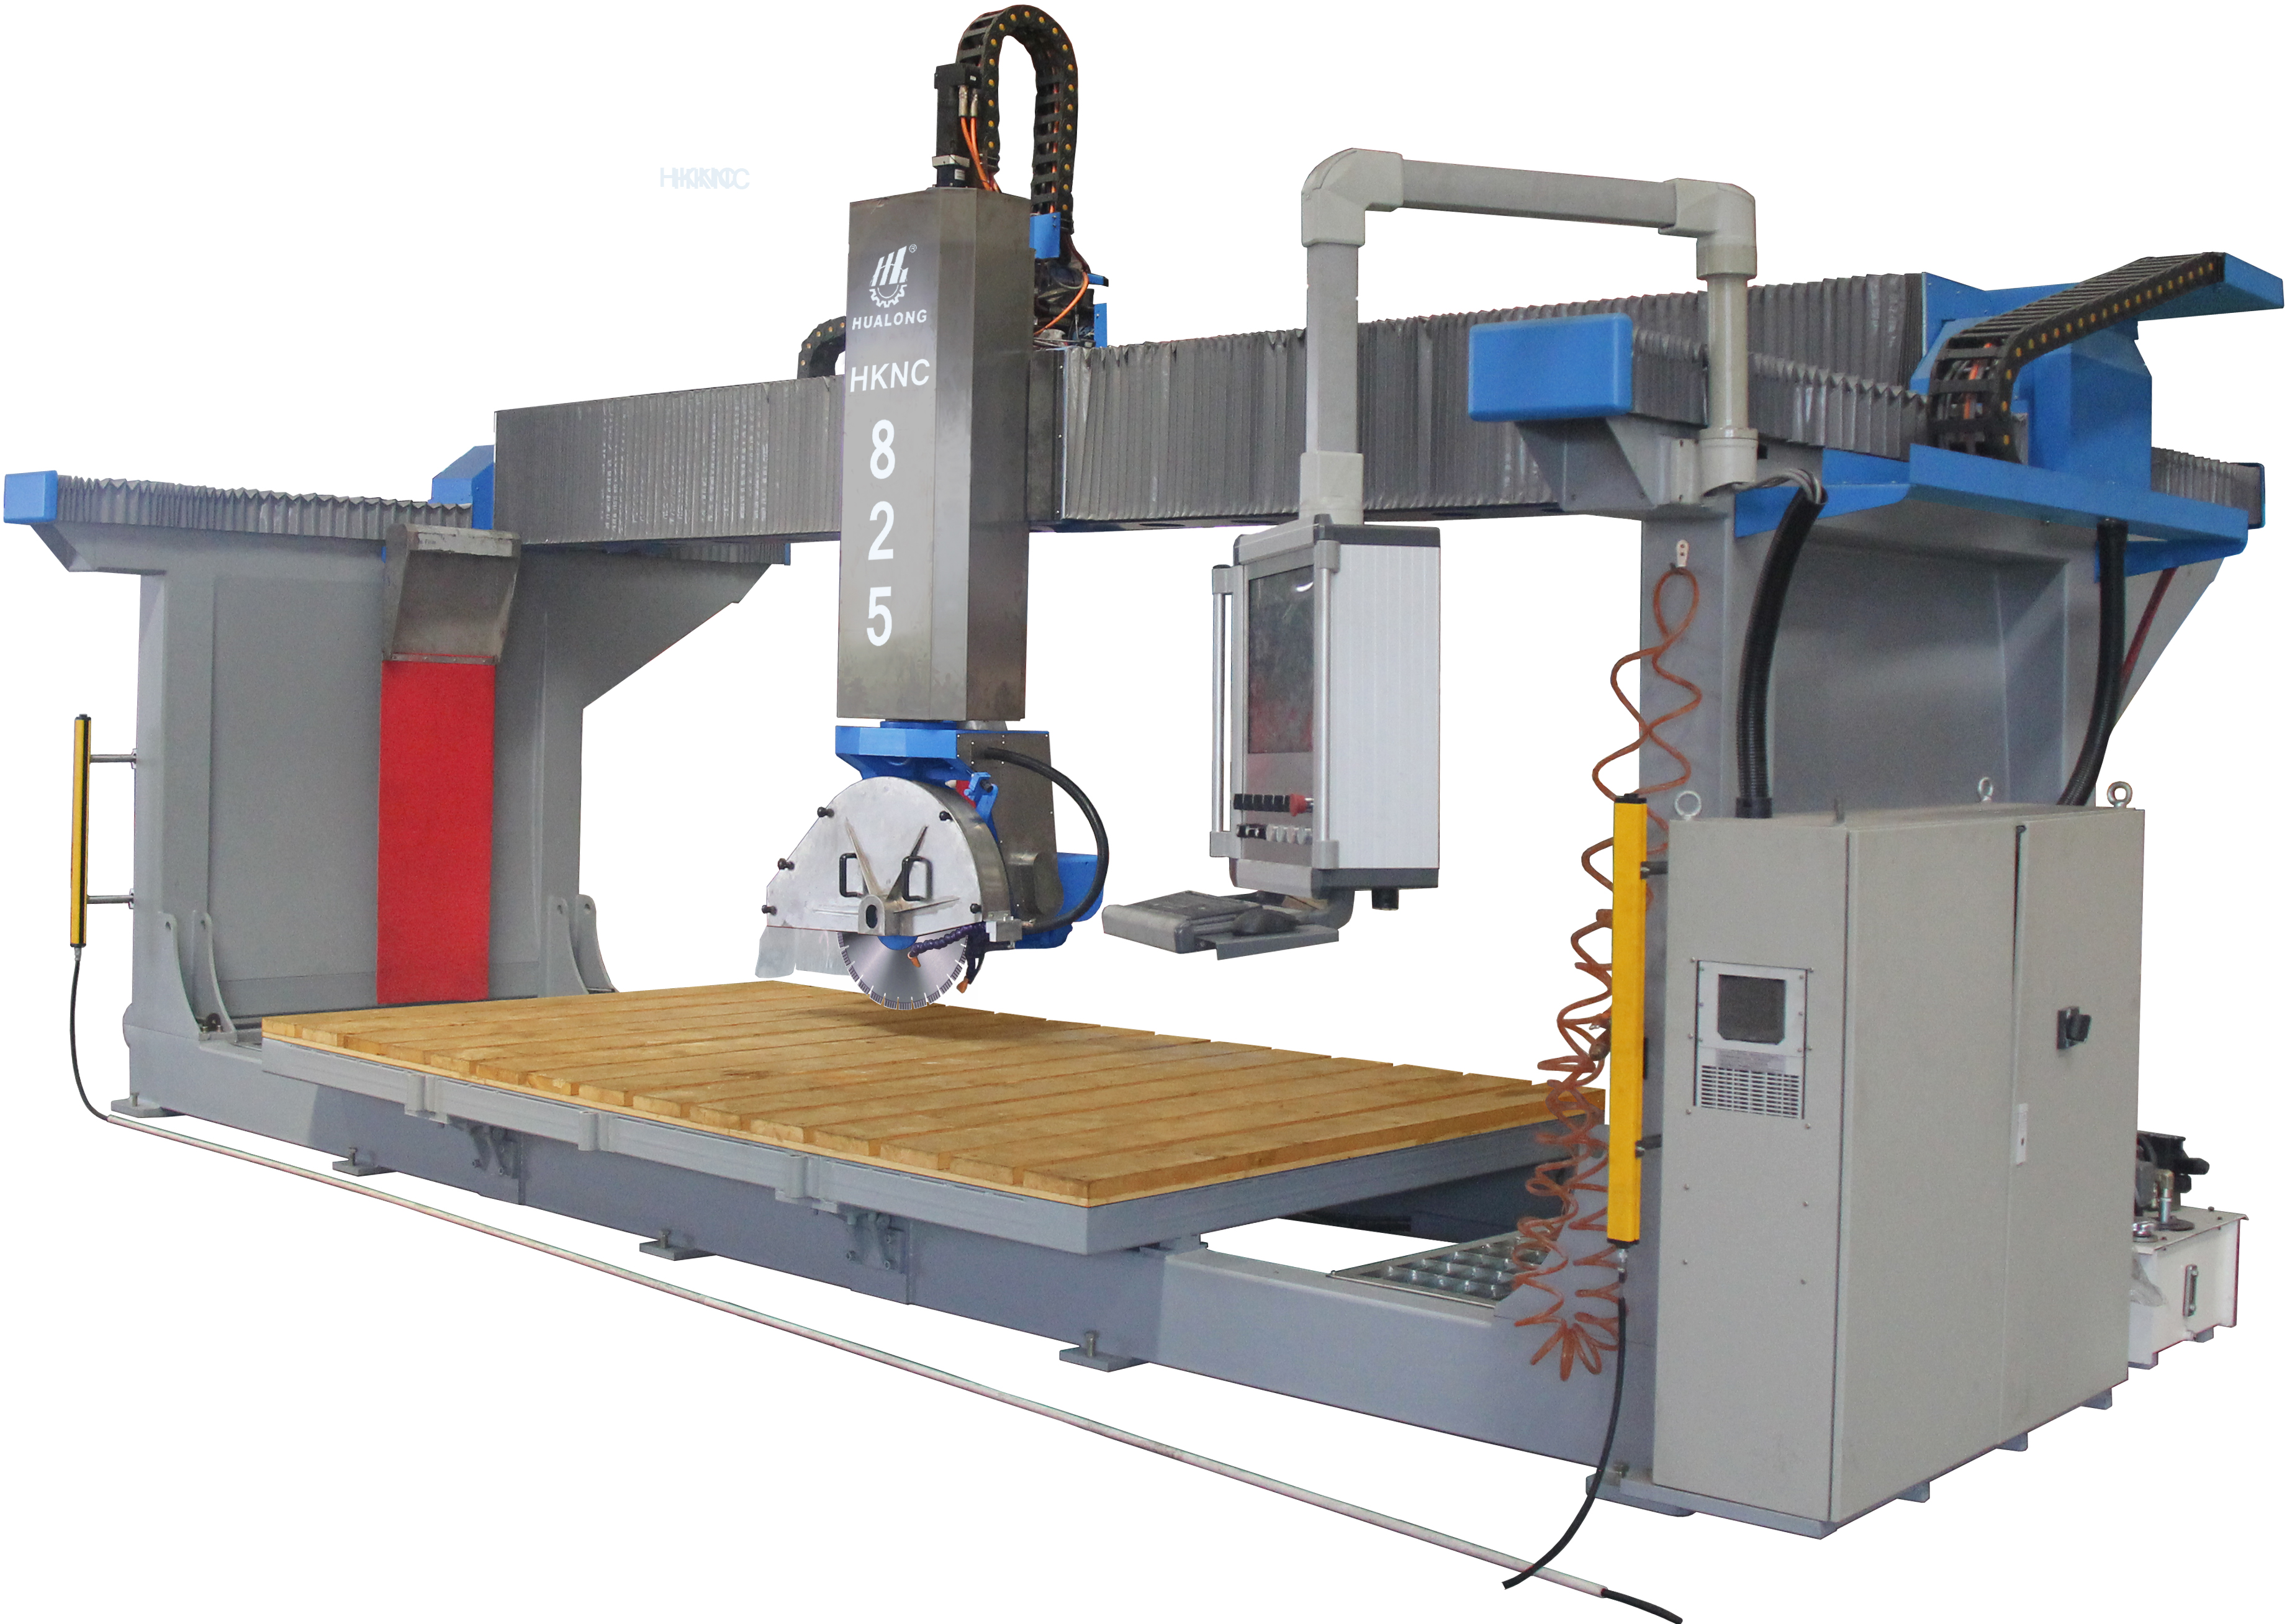 HUALONG Stone Machinery 5 Axis CNC Bridge Saw Granite Cutting Machine for Carving Milling Cutting Drilling Countertop HKNC-825 